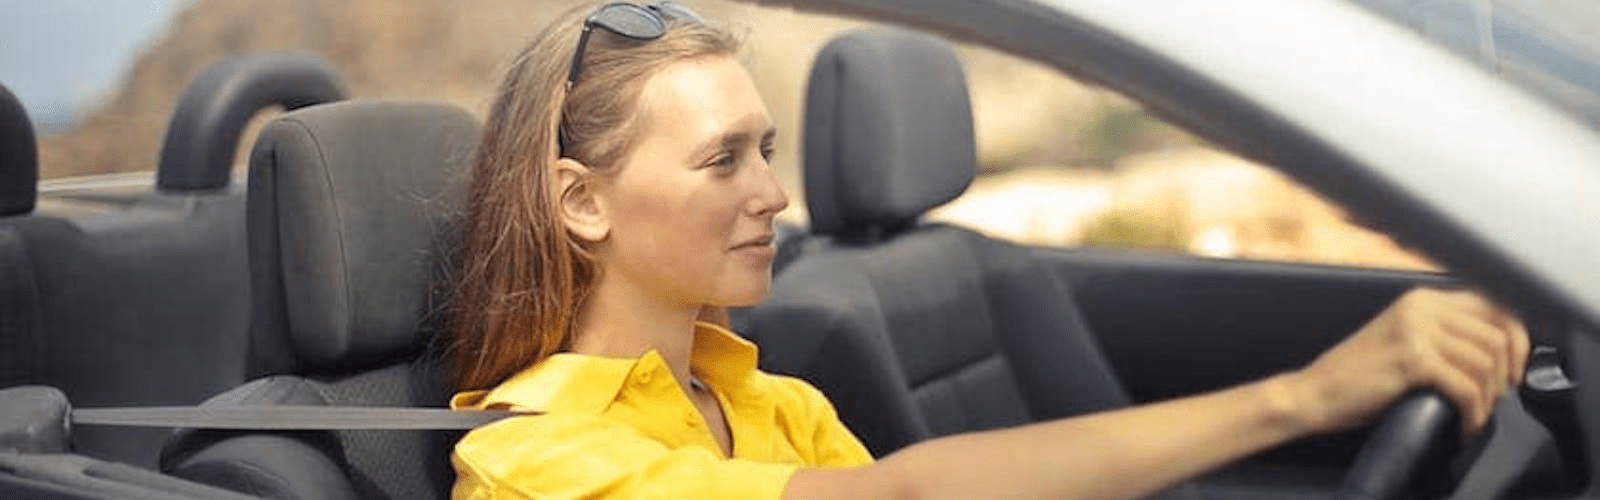 lady sitting in car driving